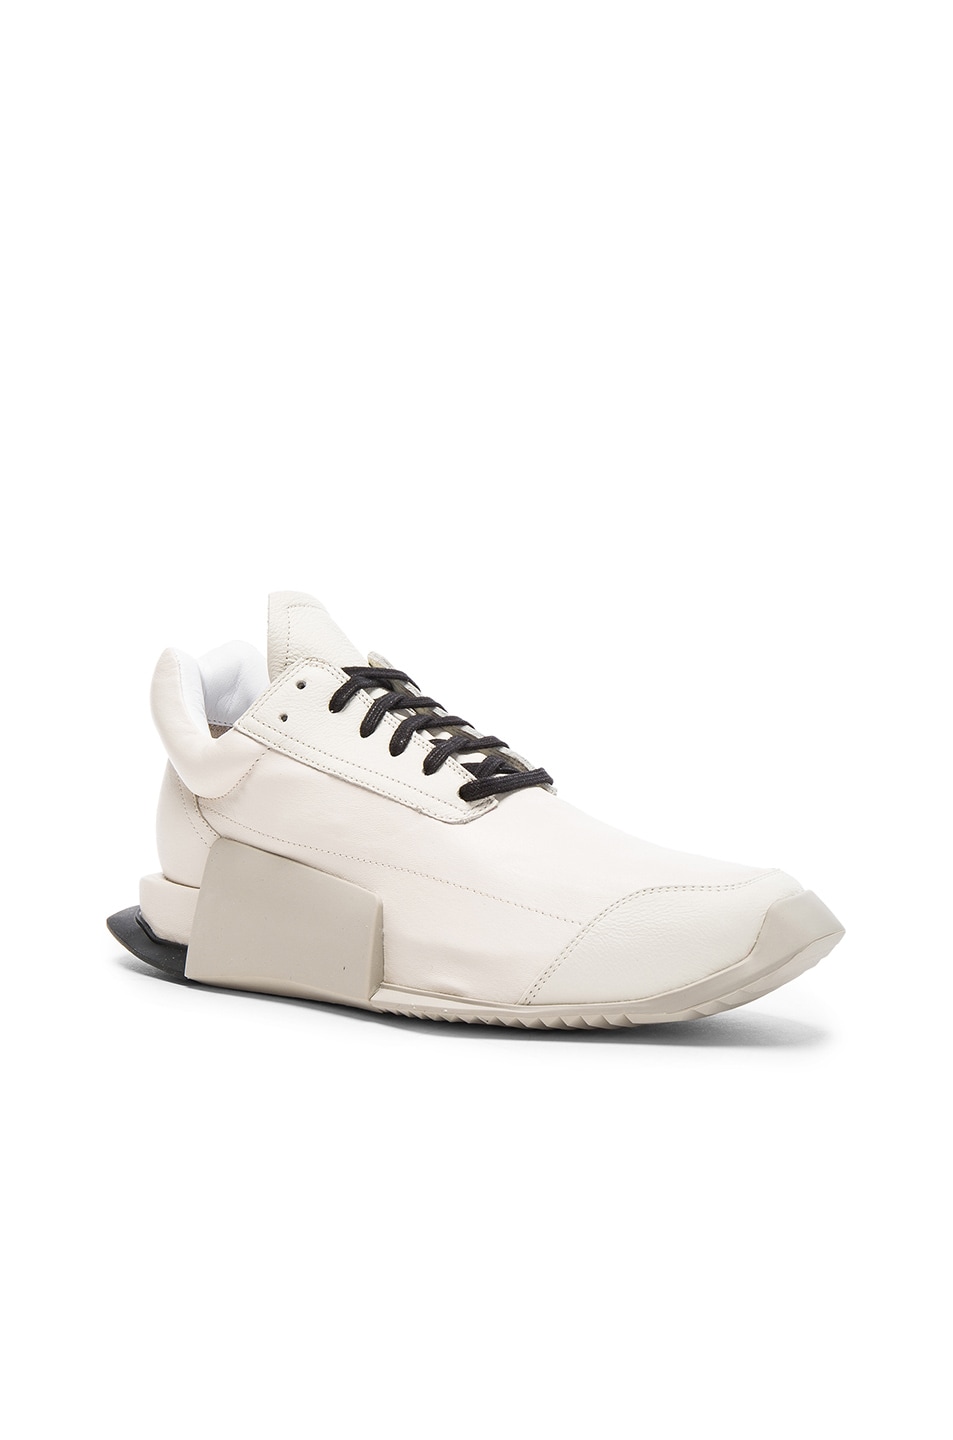 Image 1 of Rick Owens x Adidas Leather Level Runners in White